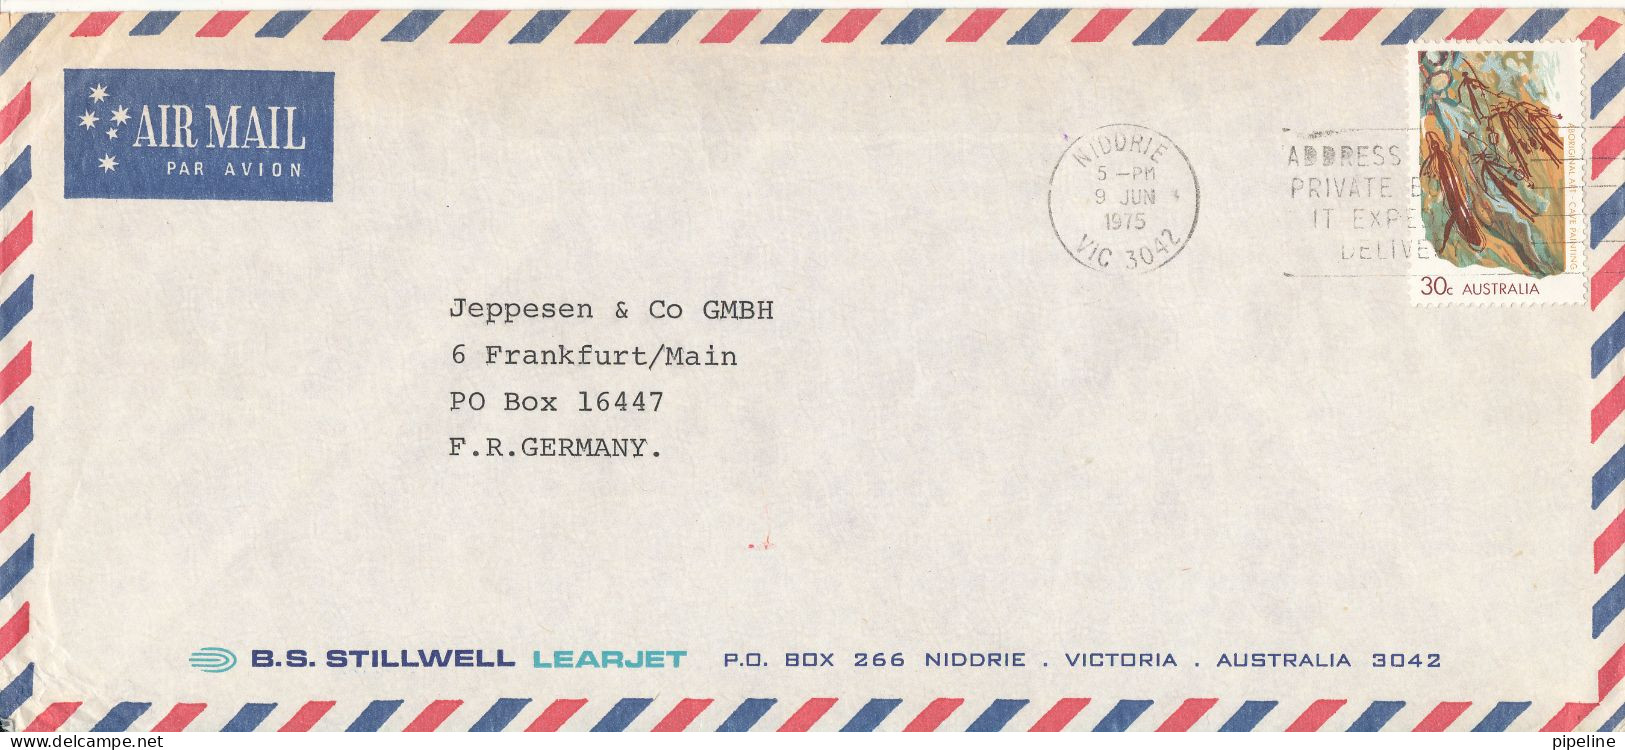 Australia Air Mail Cover Sent To Germany 9-6-1975 Single Franked - Lettres & Documents